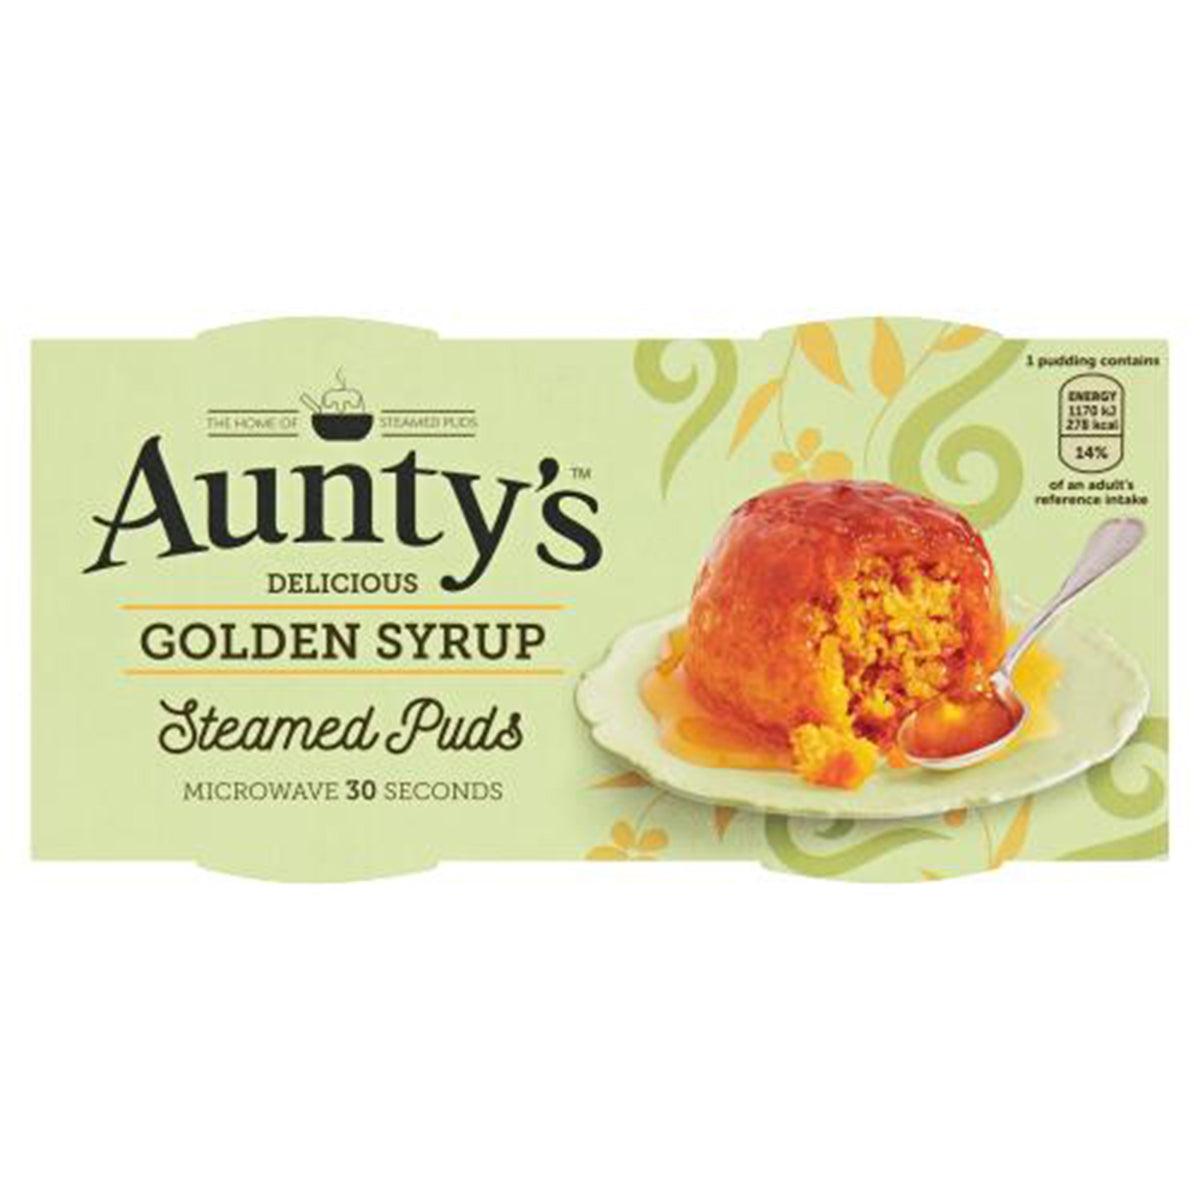 A package of Aunty's Delicious Golden Syrup Steamed Puds - 190g, ready in 30 seconds.